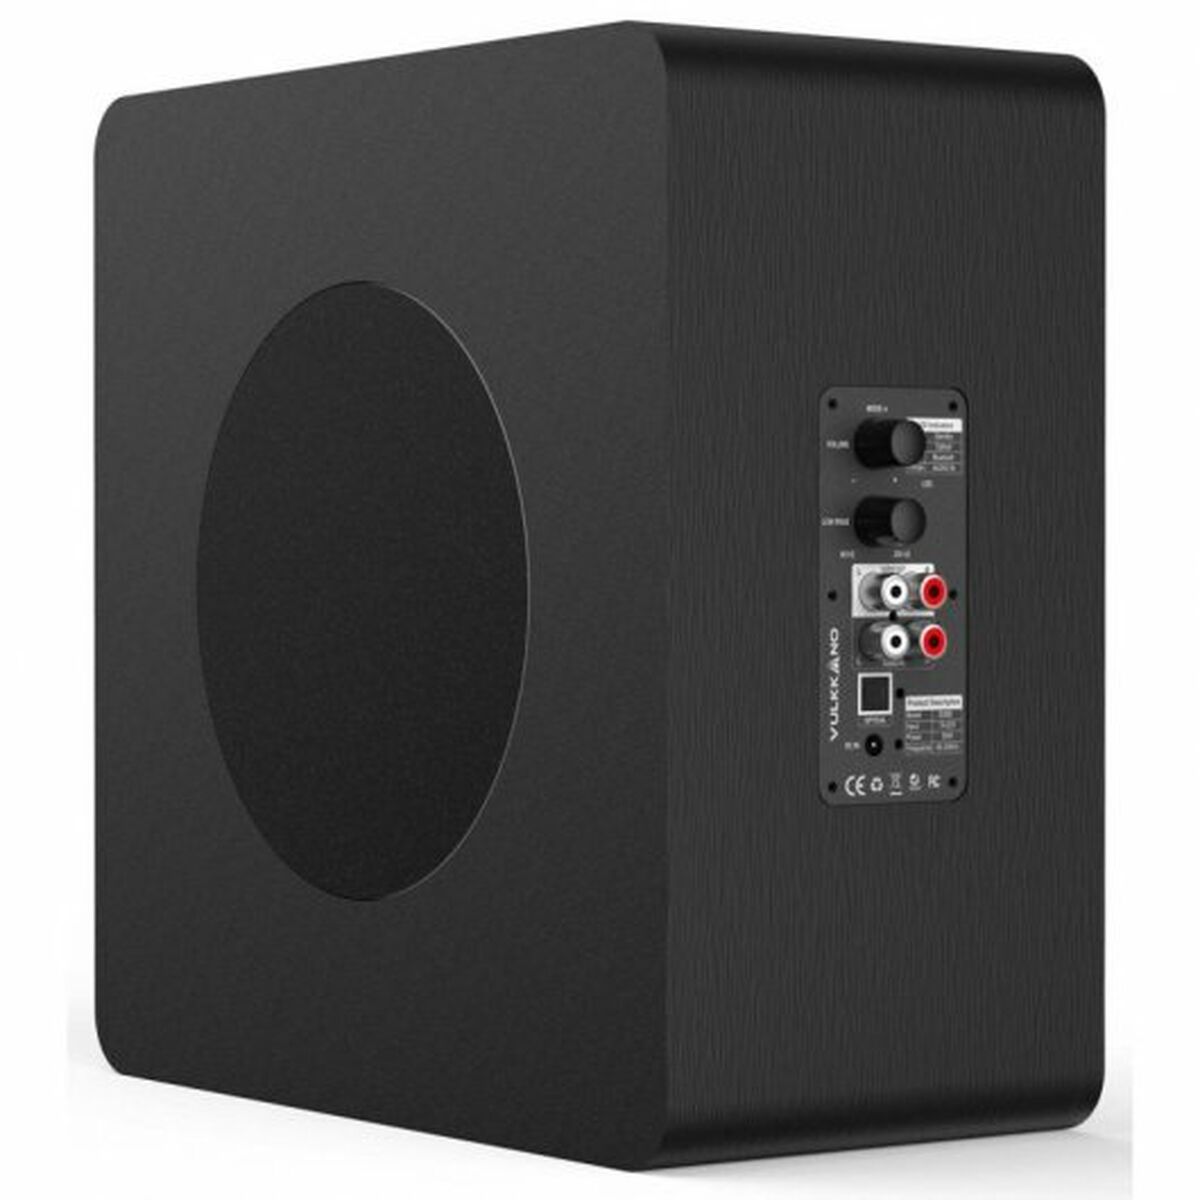 Subwoofer Vulkkano SUB6, Vulkkano, Electronics, Audio and Hi-Fi equipment, subwoofer-vulkkano-sub6, Brand_Vulkkano, category-reference-2609, category-reference-2637, category-reference-2882, category-reference-t-19653, category-reference-t-7441, category-reference-t-7442, category-reference-t-7451, cinema and television, Condition_NEW, entertainment, music, Price_100 - 200, Teleworking, RiotNook